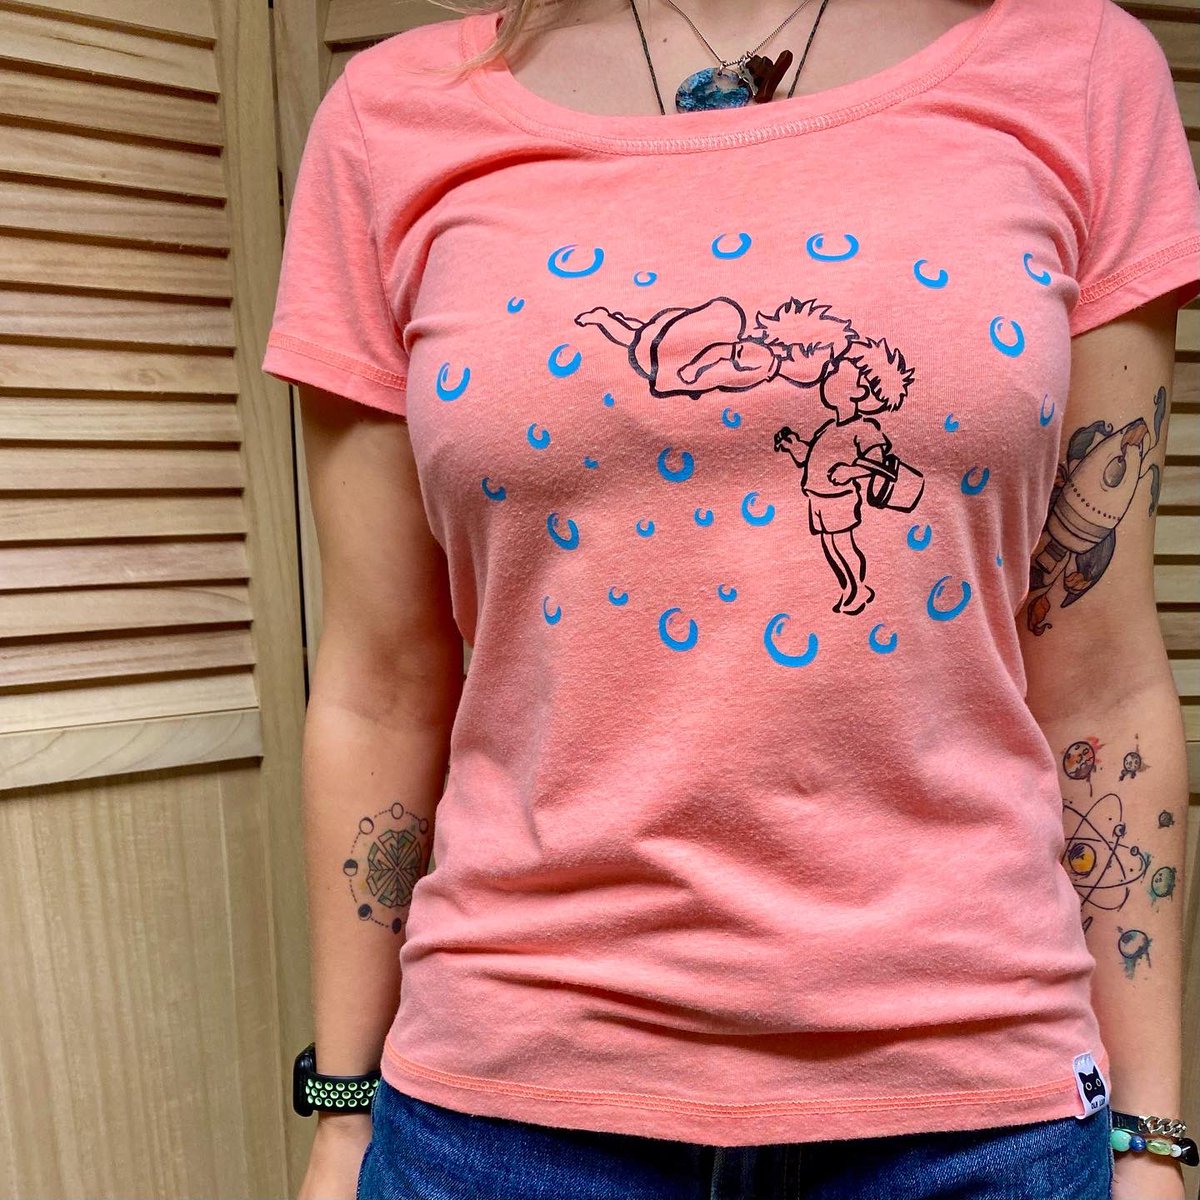 T-shirt corail Ponyo       

#customs #customclothing #handmade #ecologie #ecology #création #secondemain #secondhandclothes #art #secondhand #cricut #reusable #faitmain #upcycling #upcyclingfashion #upcycled #friperie #japon #ponyo #ghibli